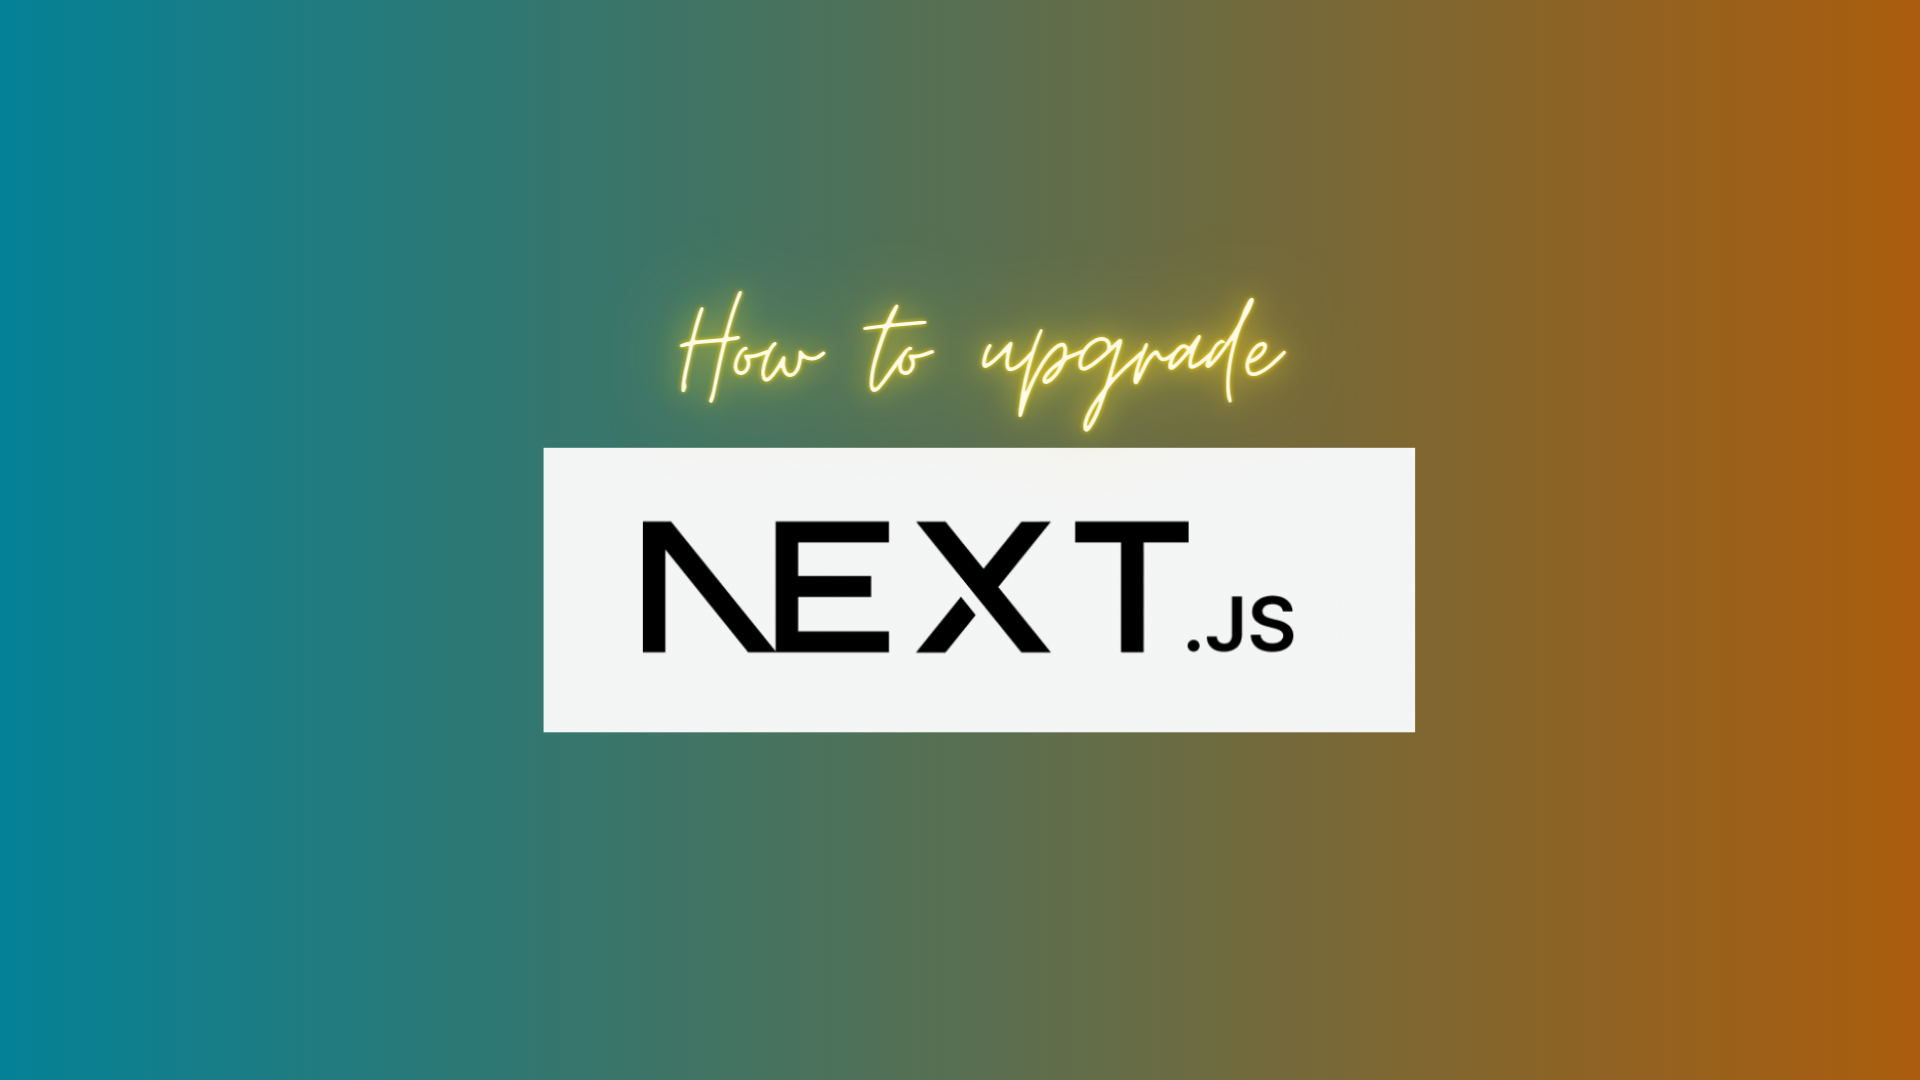 How to upgrade Next.js with Next.js logo on a blended blue and orange background.